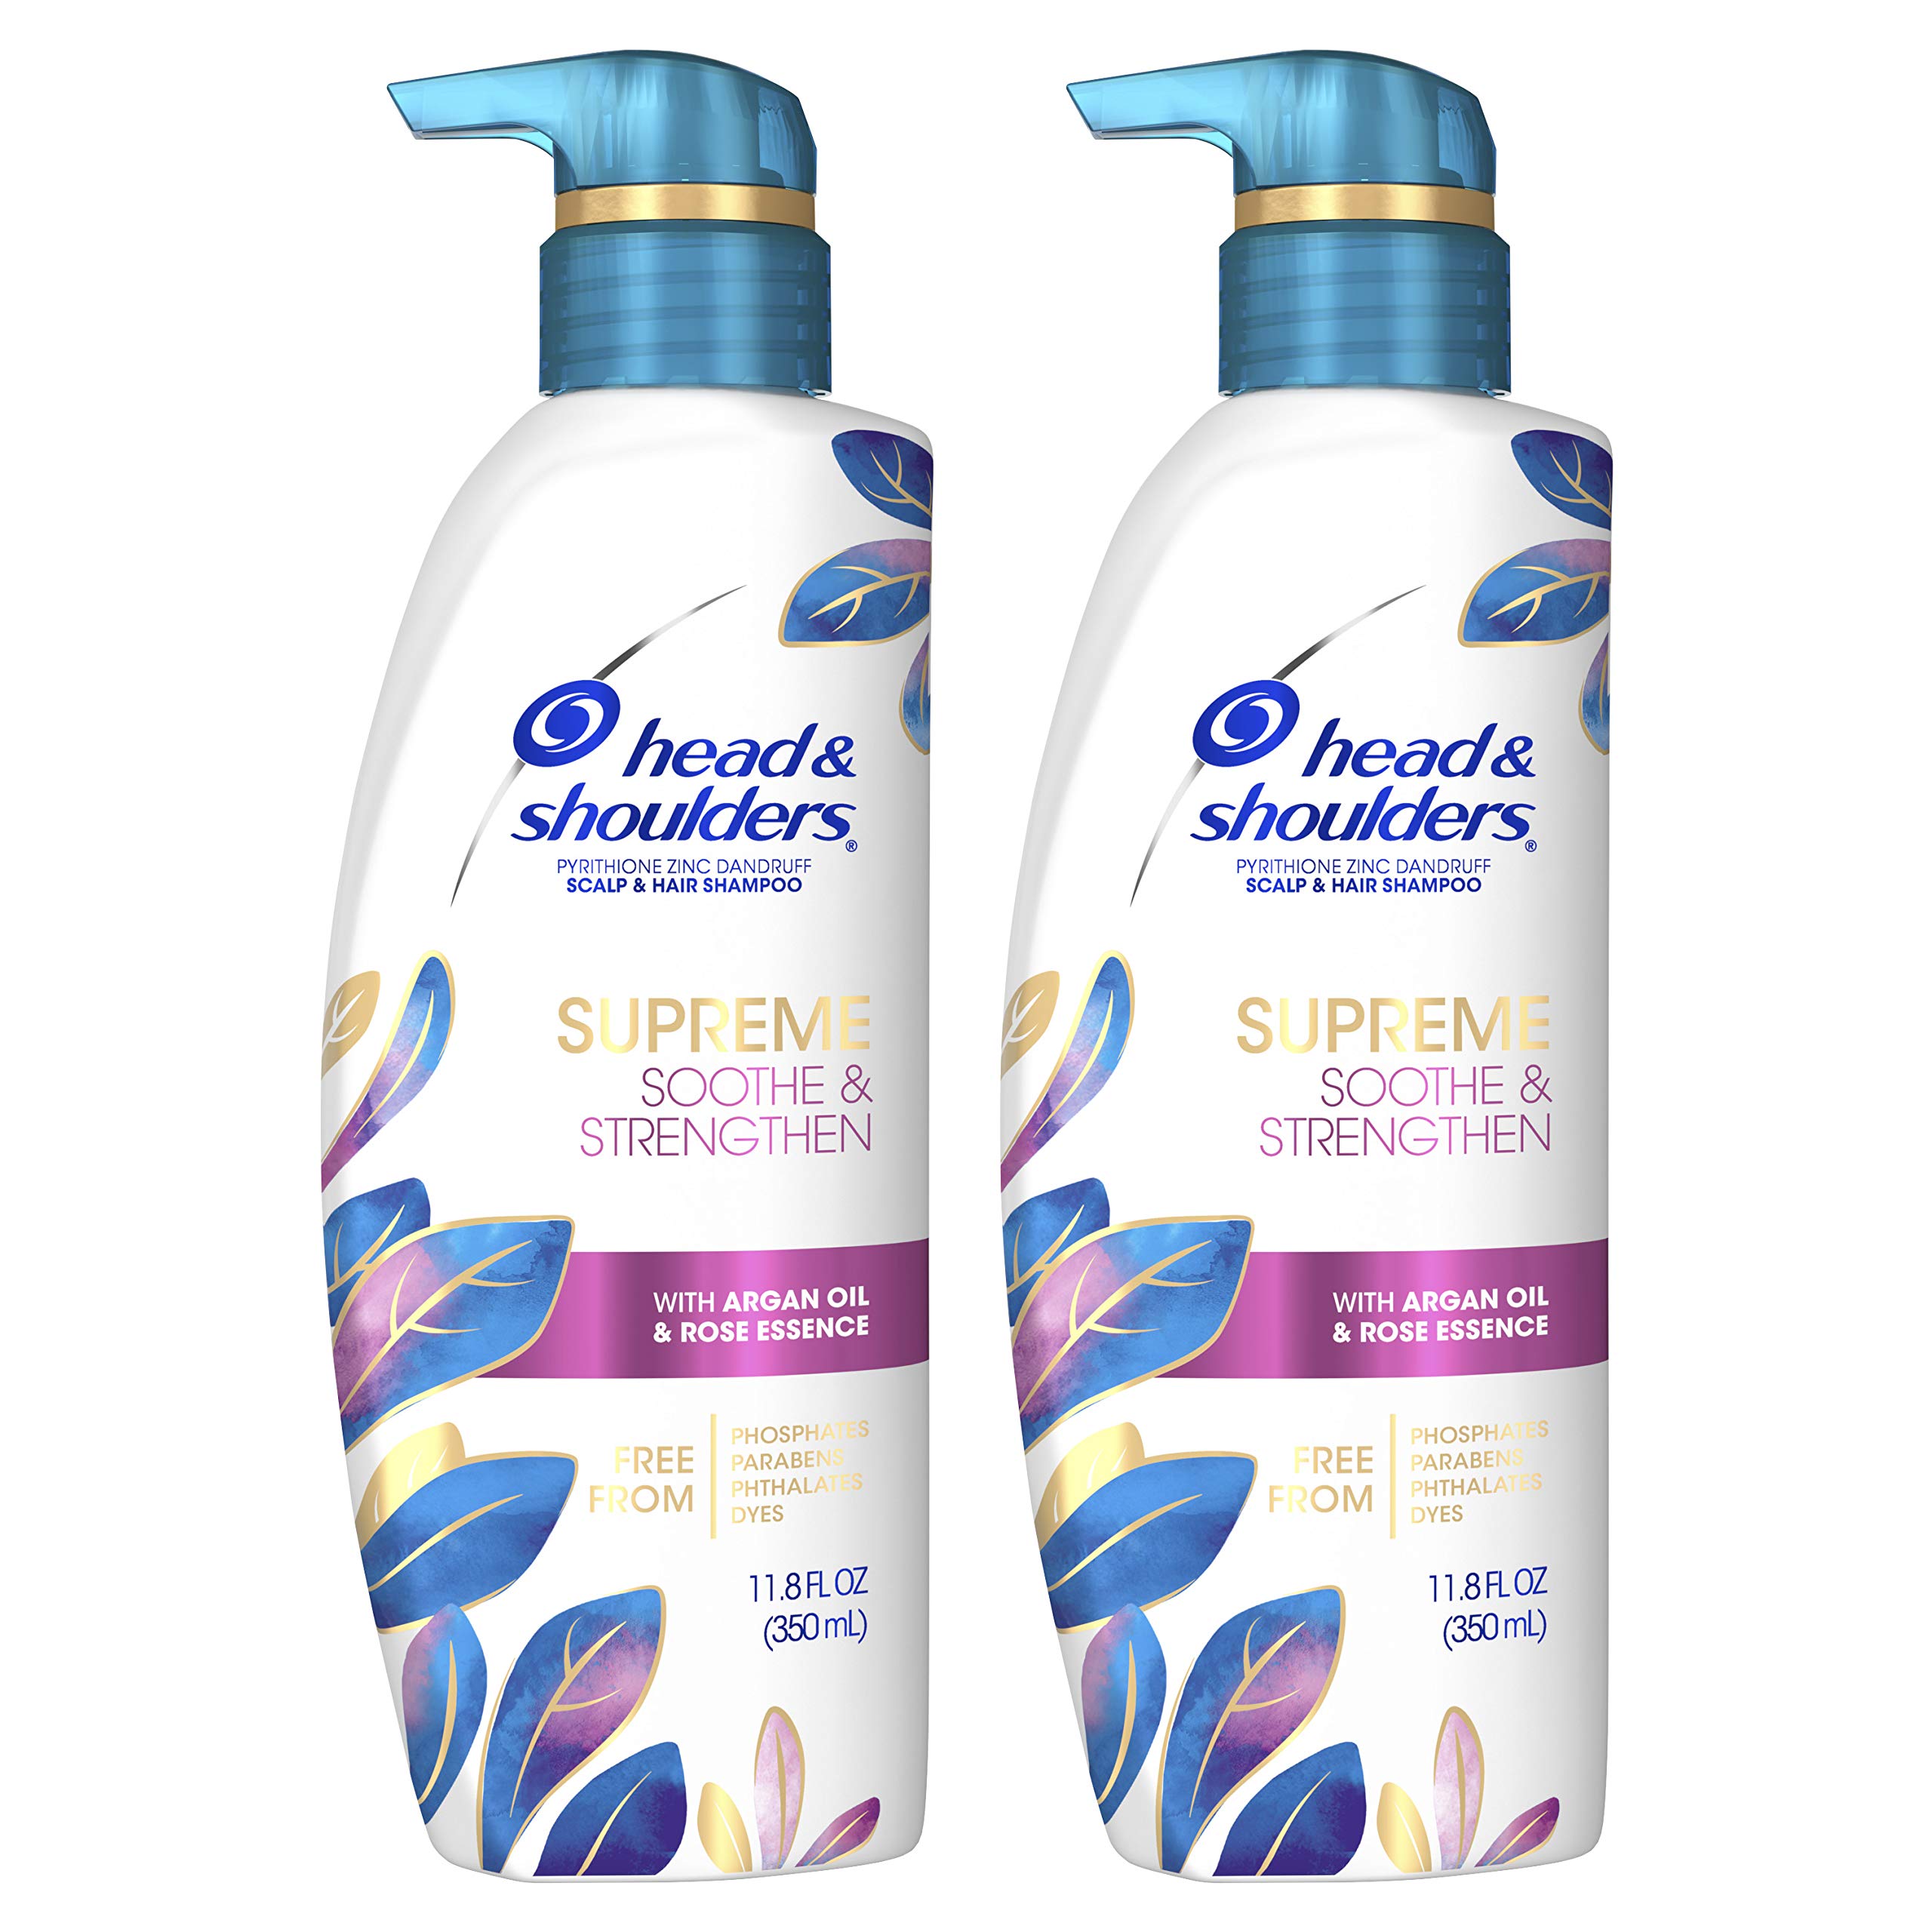 Mua Head & Shoulders Supreme, Scalp Care and Dandruff Treatment Shampoo,  with Argan Oil and Rose Essence, Soothe and Strengthen Hair and Scalp,   Fl Oz Twin Pack trên Amazon Mỹ chính